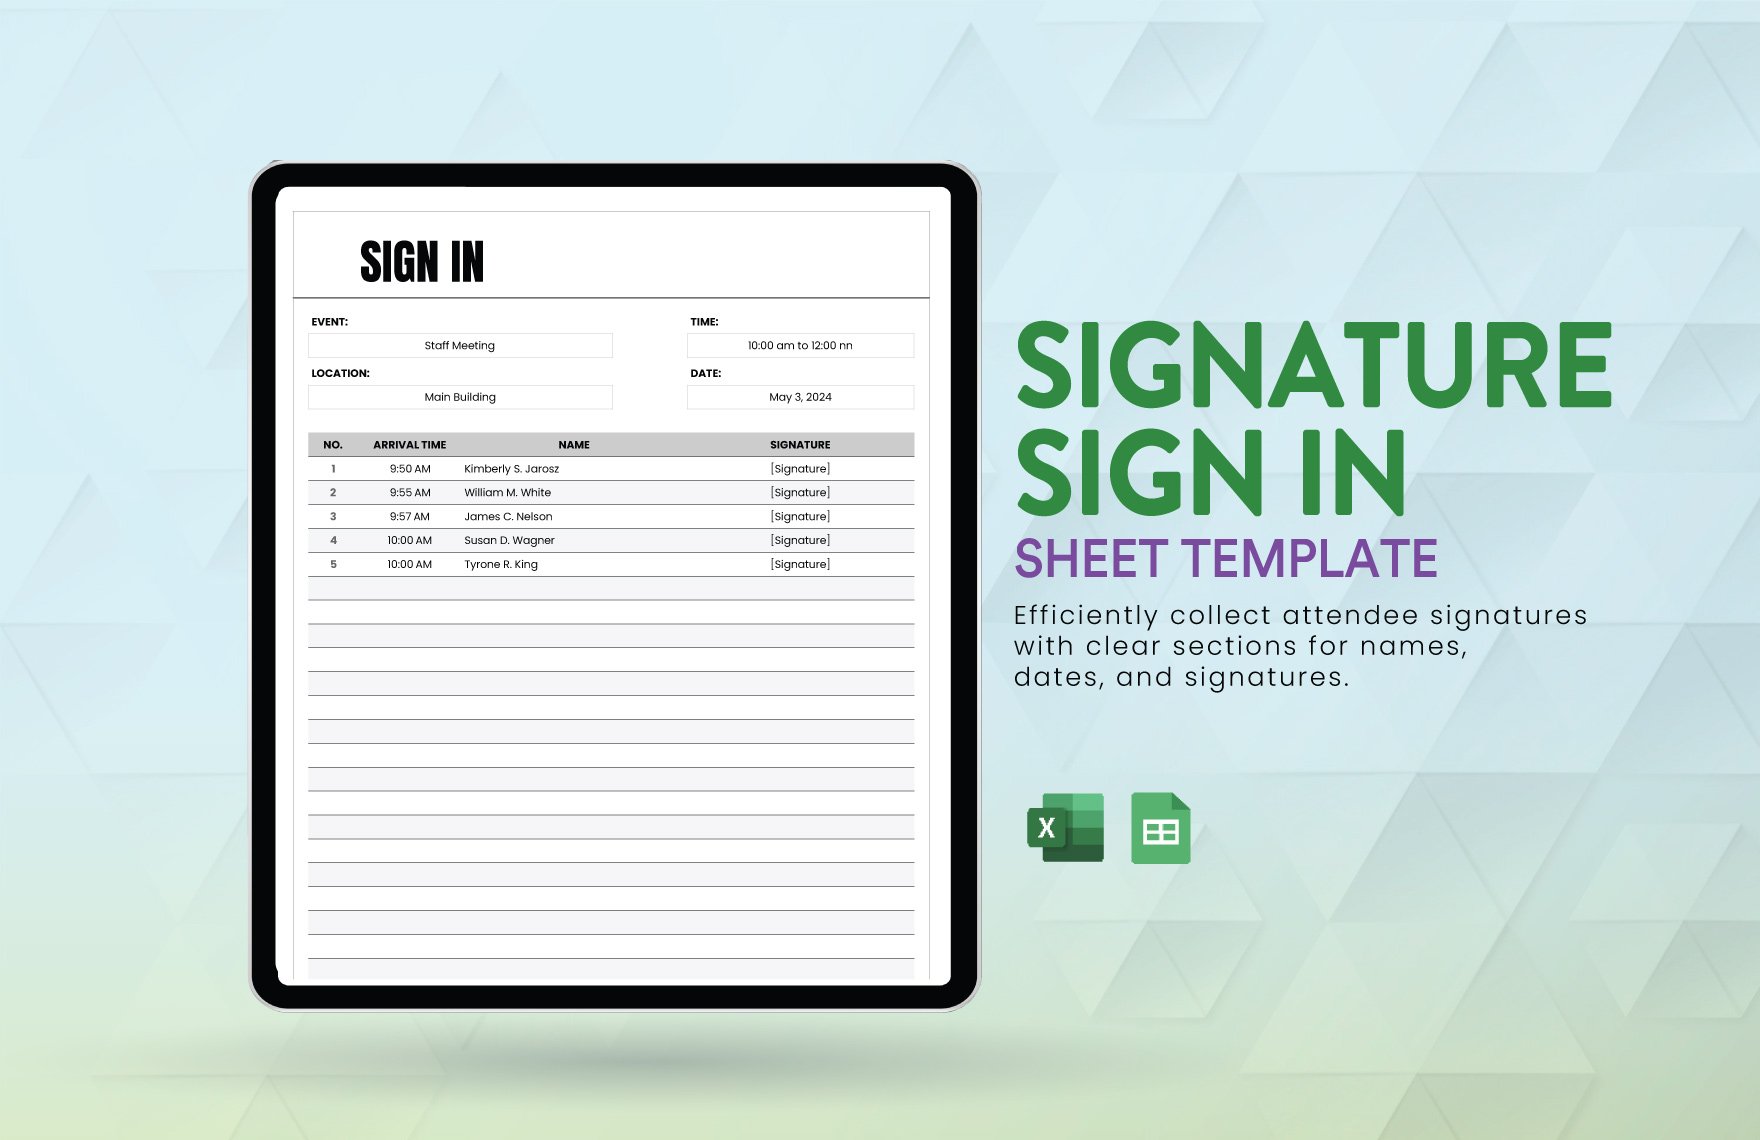 Free Signature Sign in Sheet Template in Excel, Google Sheets